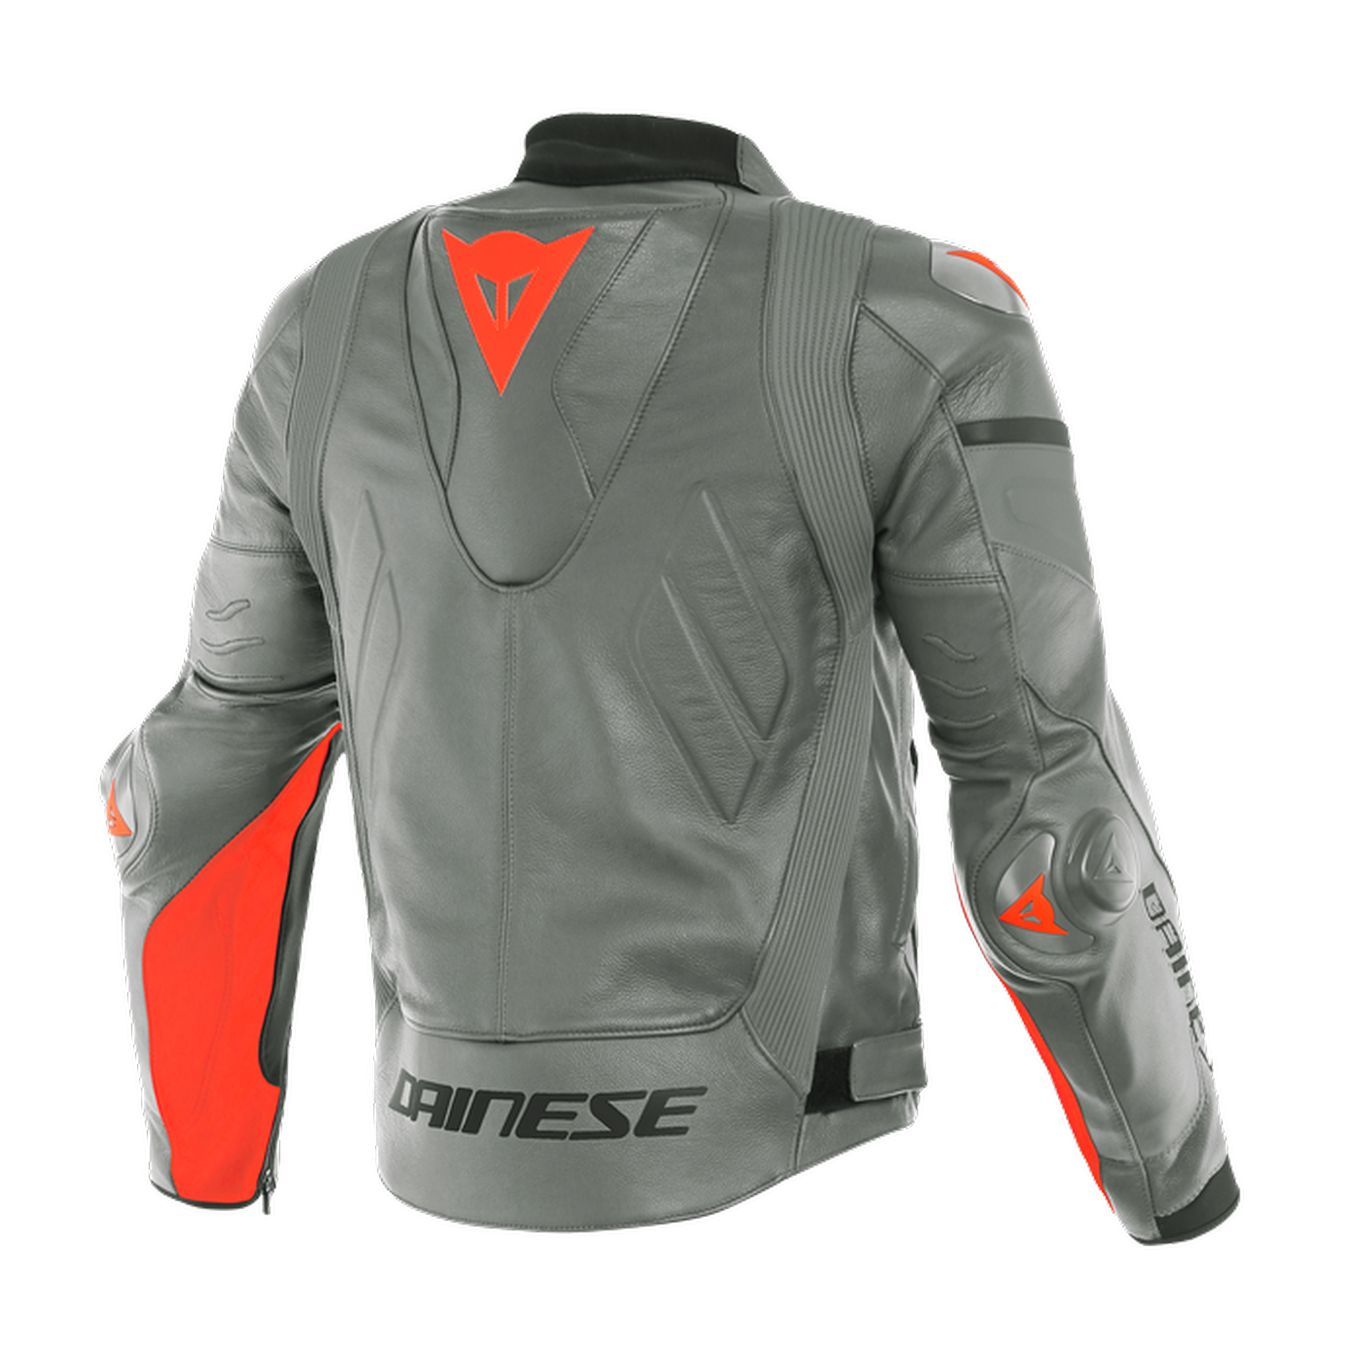 Giacca In Pelle Dainese Super Race Charcoal-gray/ch.-gr